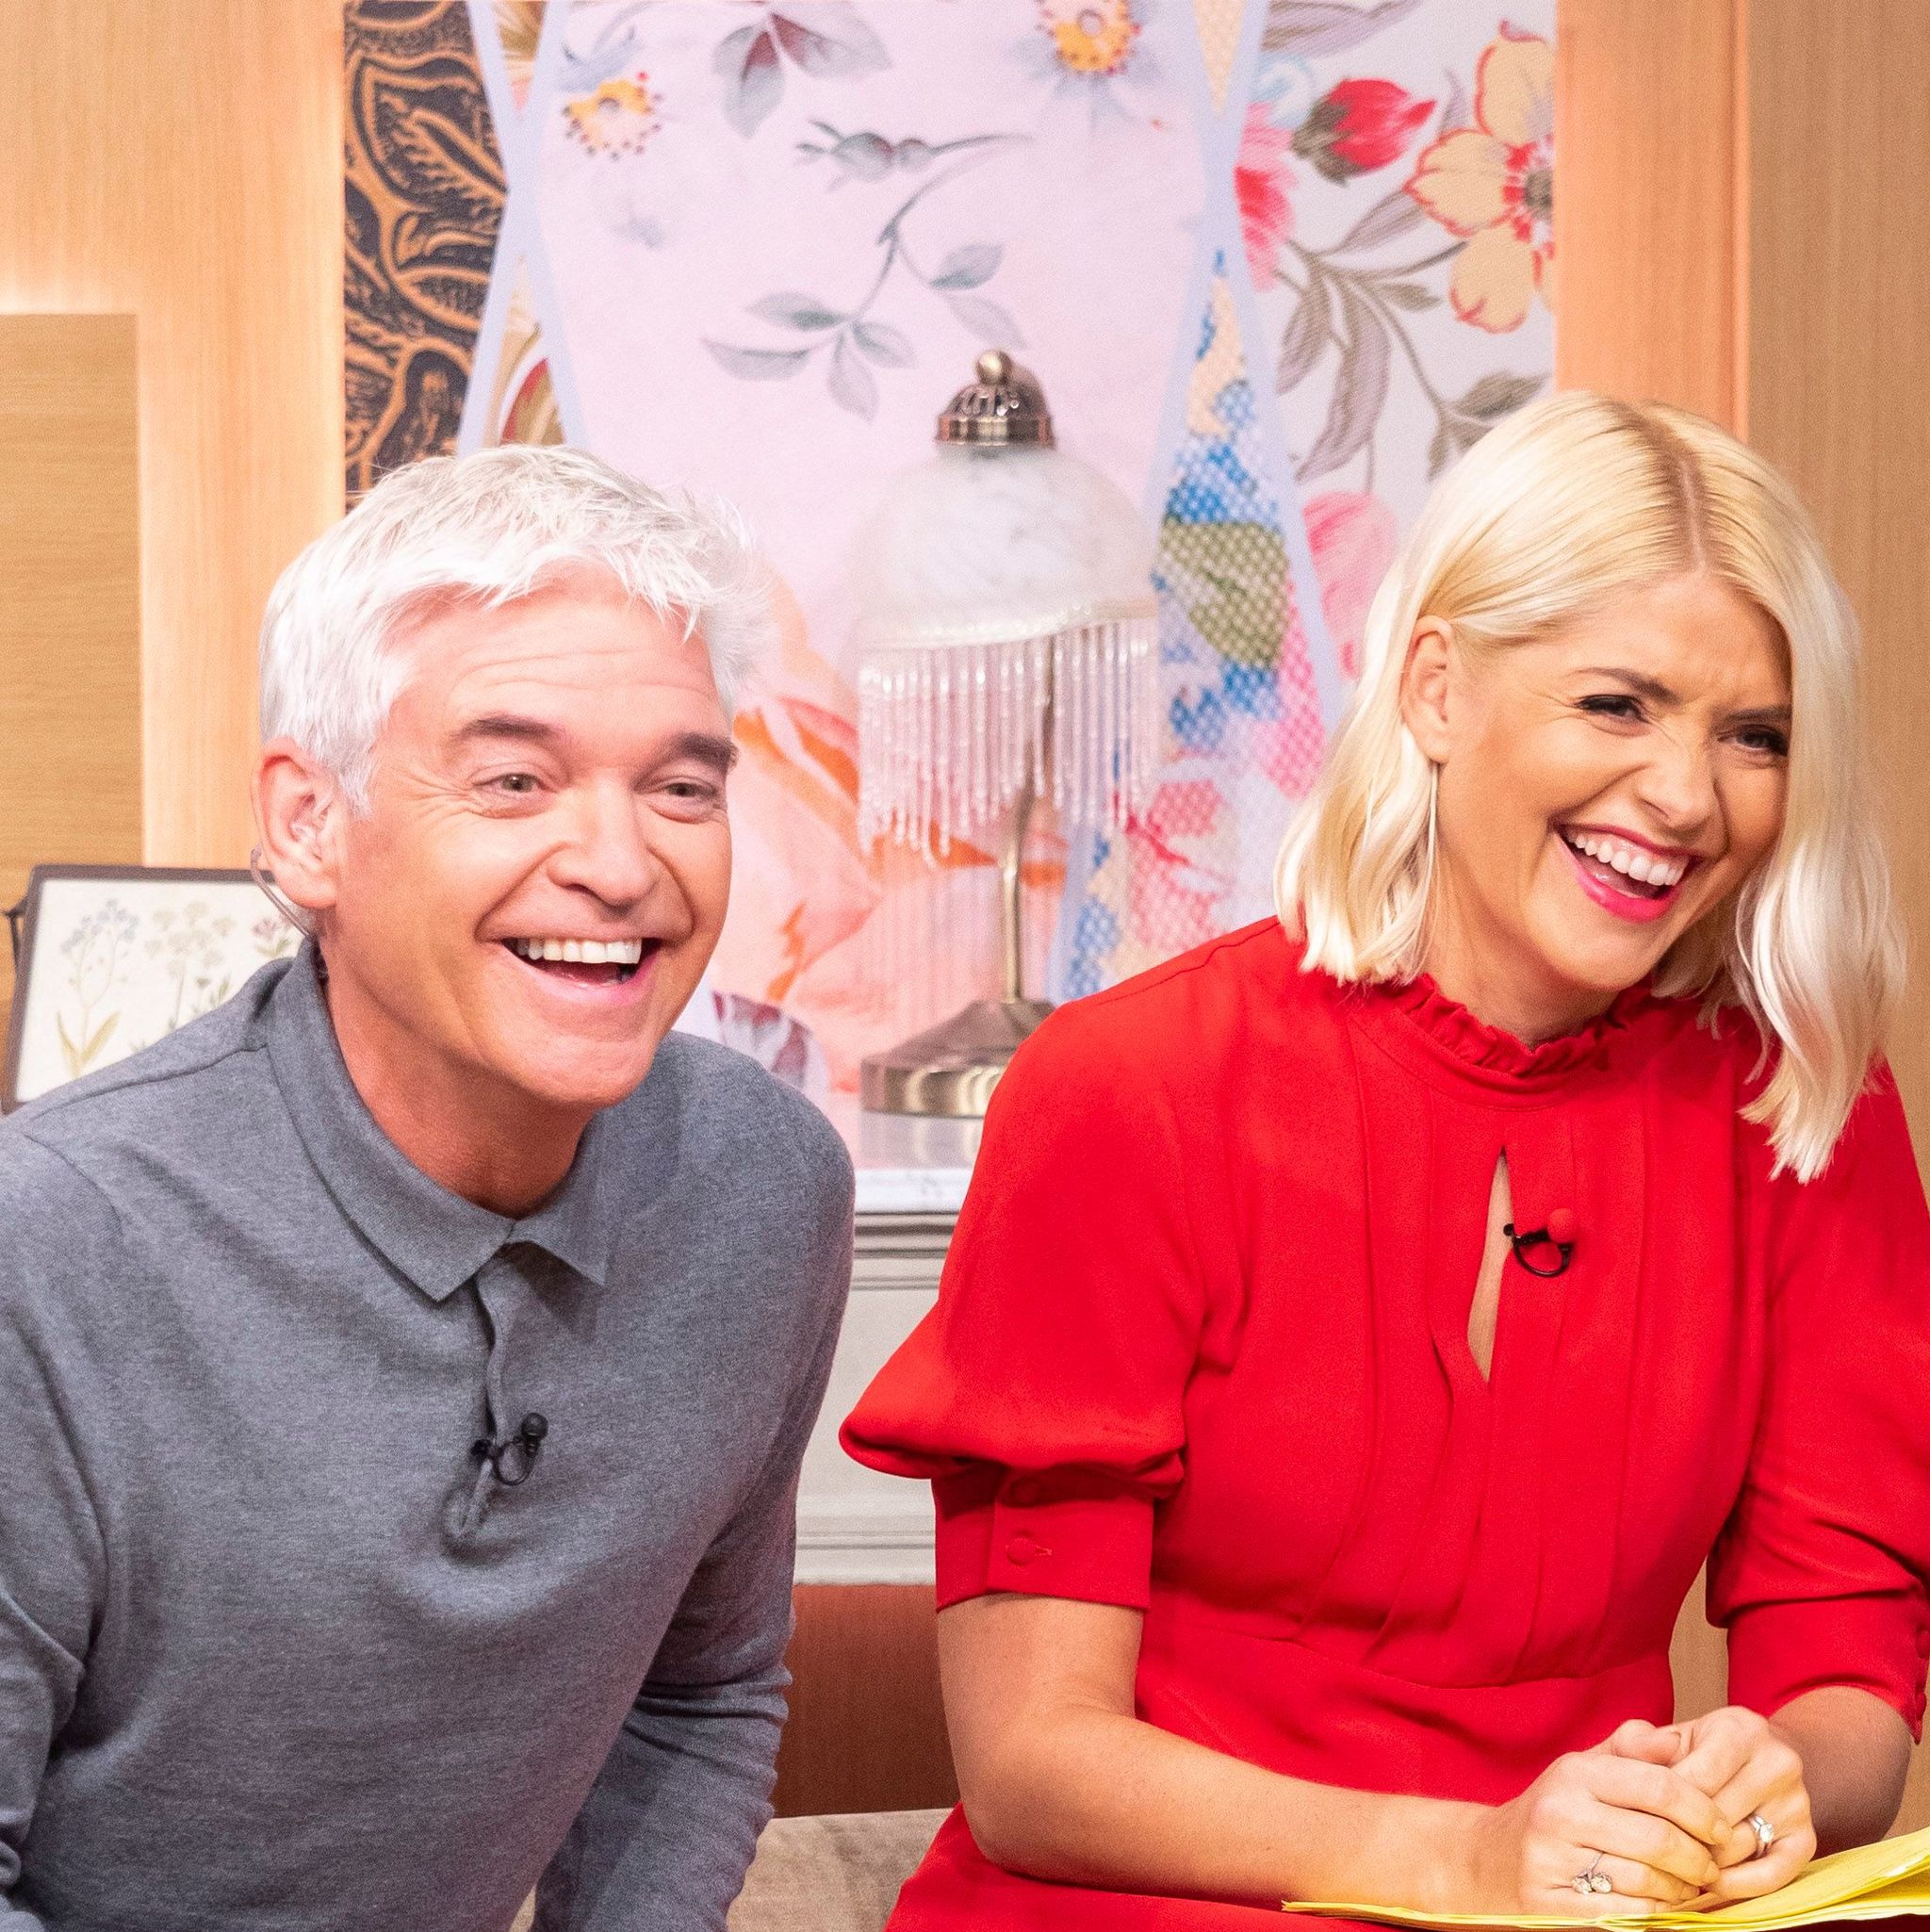 How To Get Holly Willoughby's Knitted Dress Look - UK Tights Blog